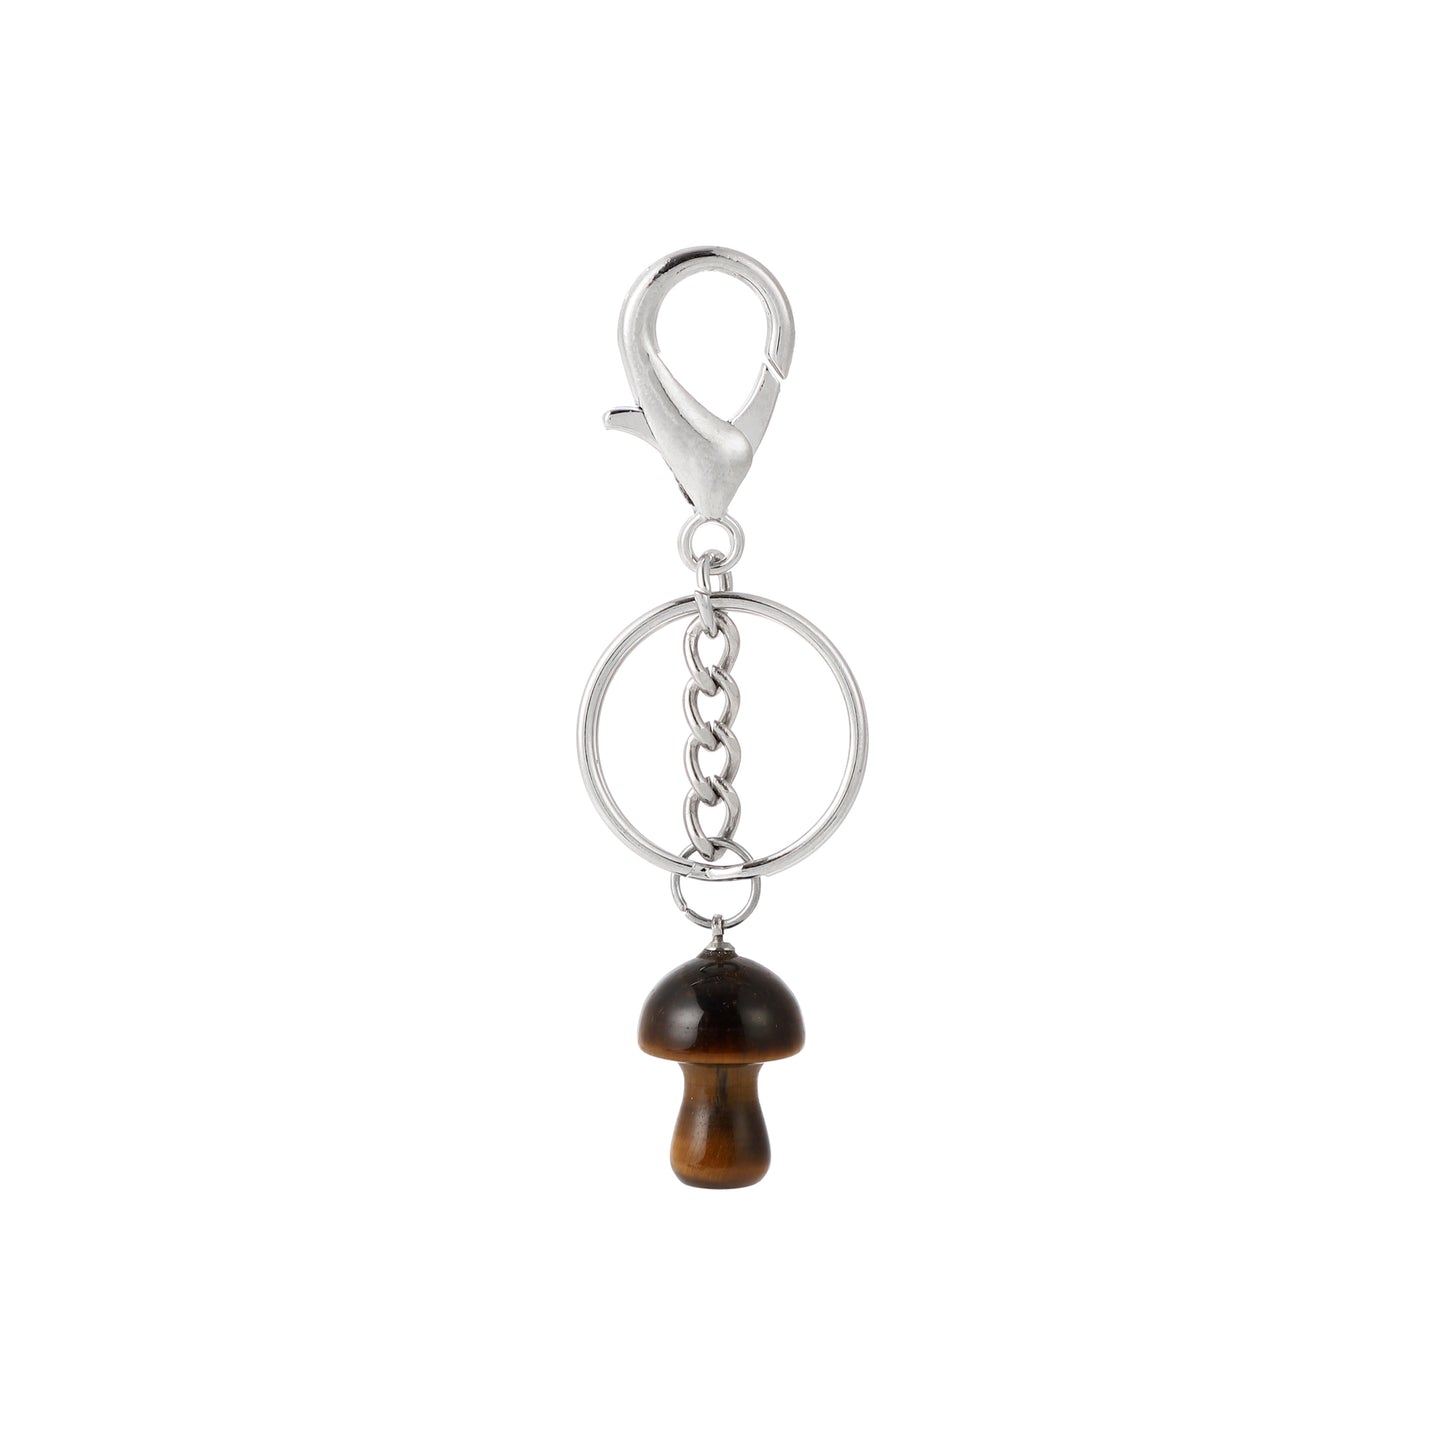 Adorable Mushroom Keychain - Carry Your Keys with Style and Whimsy